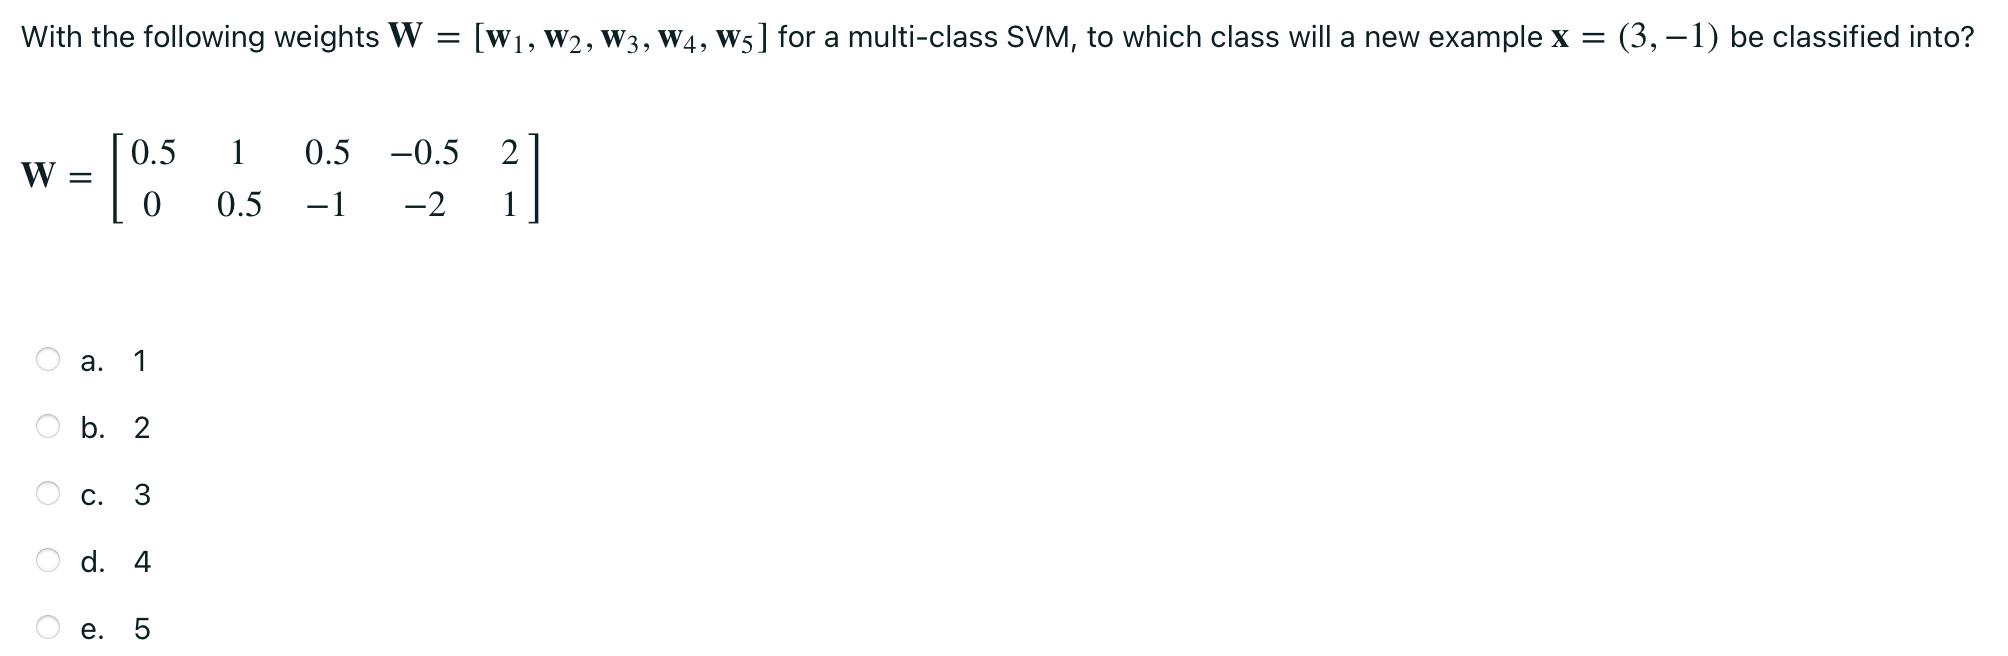 With the following weights W = [W, W2, W3, W4, W5] for a multi-class SVM, to which class will a new example x